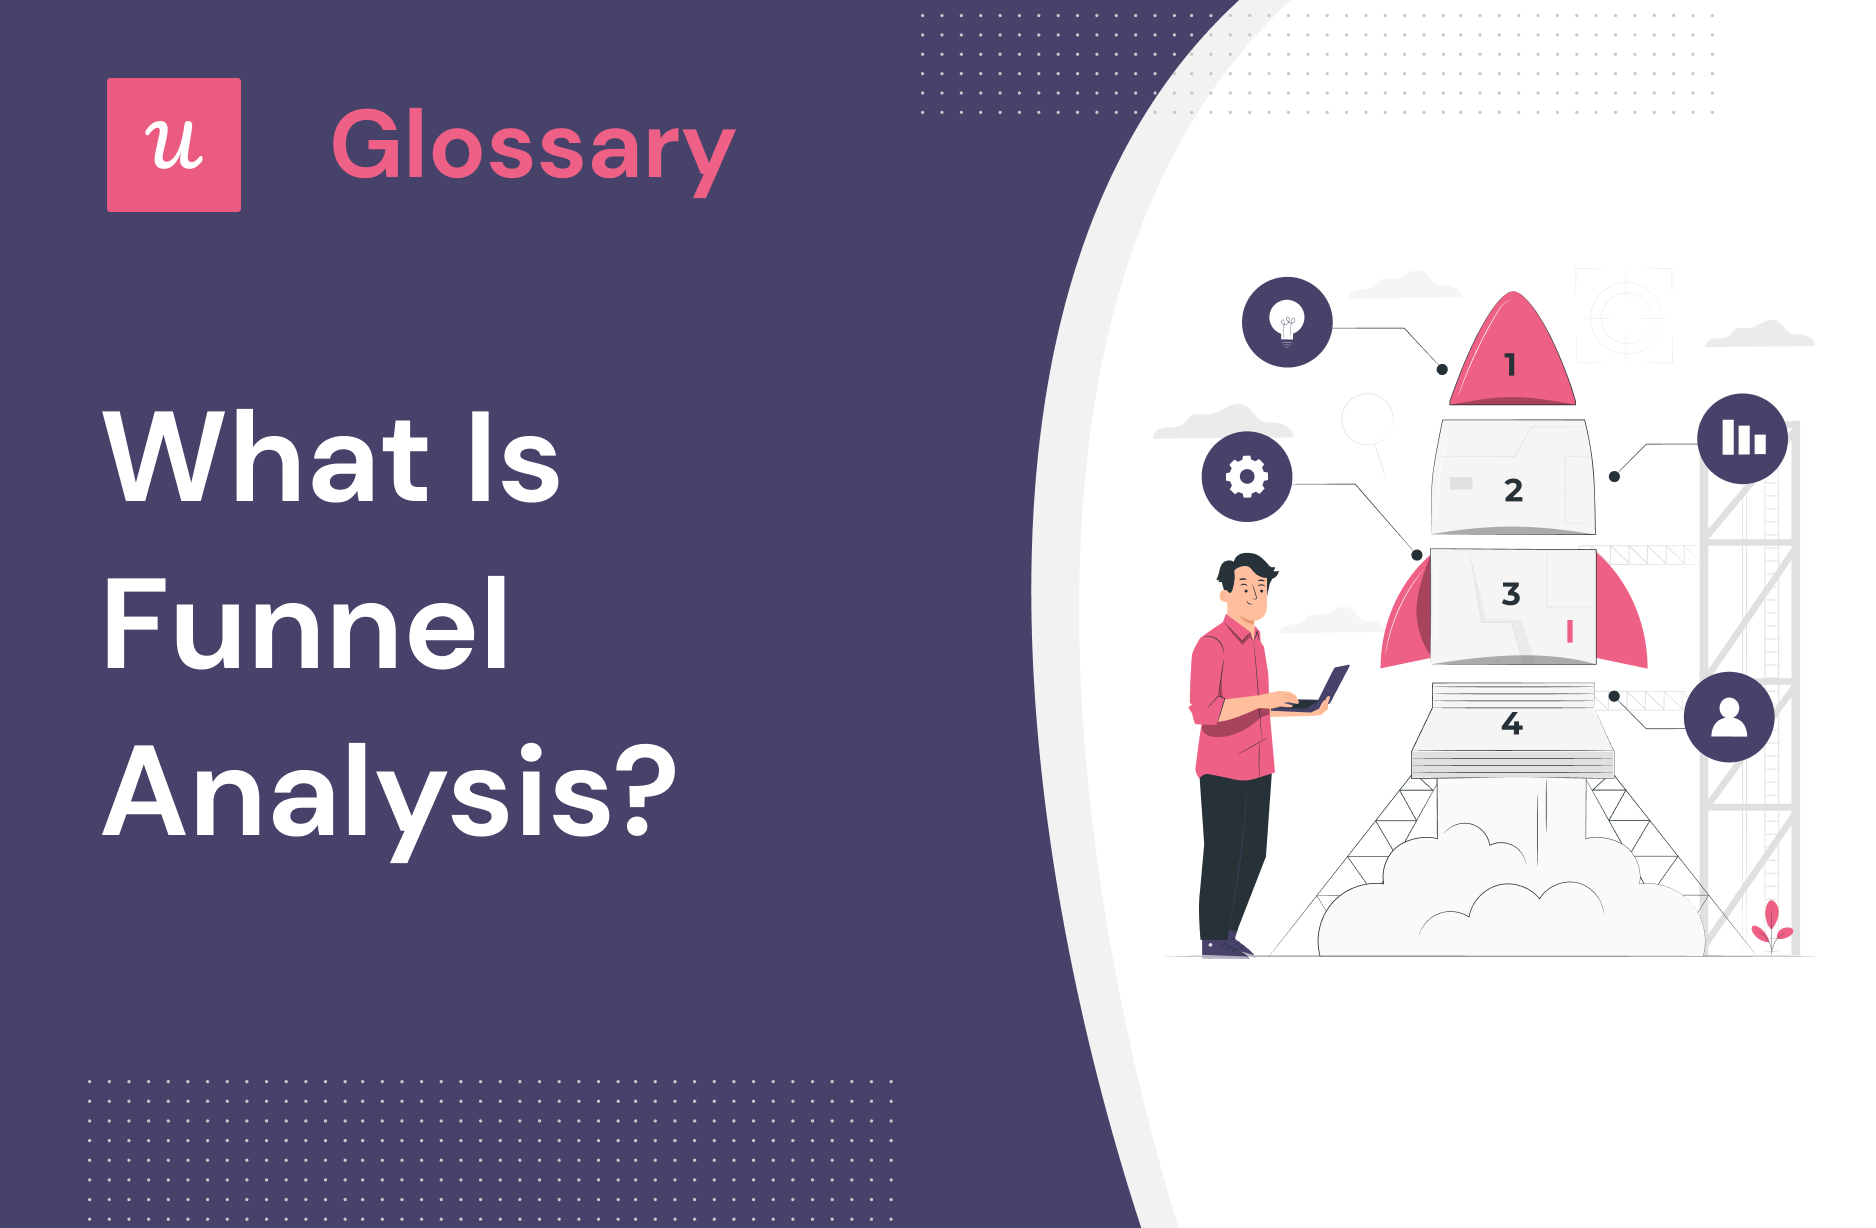 What is Funnel Analysis?